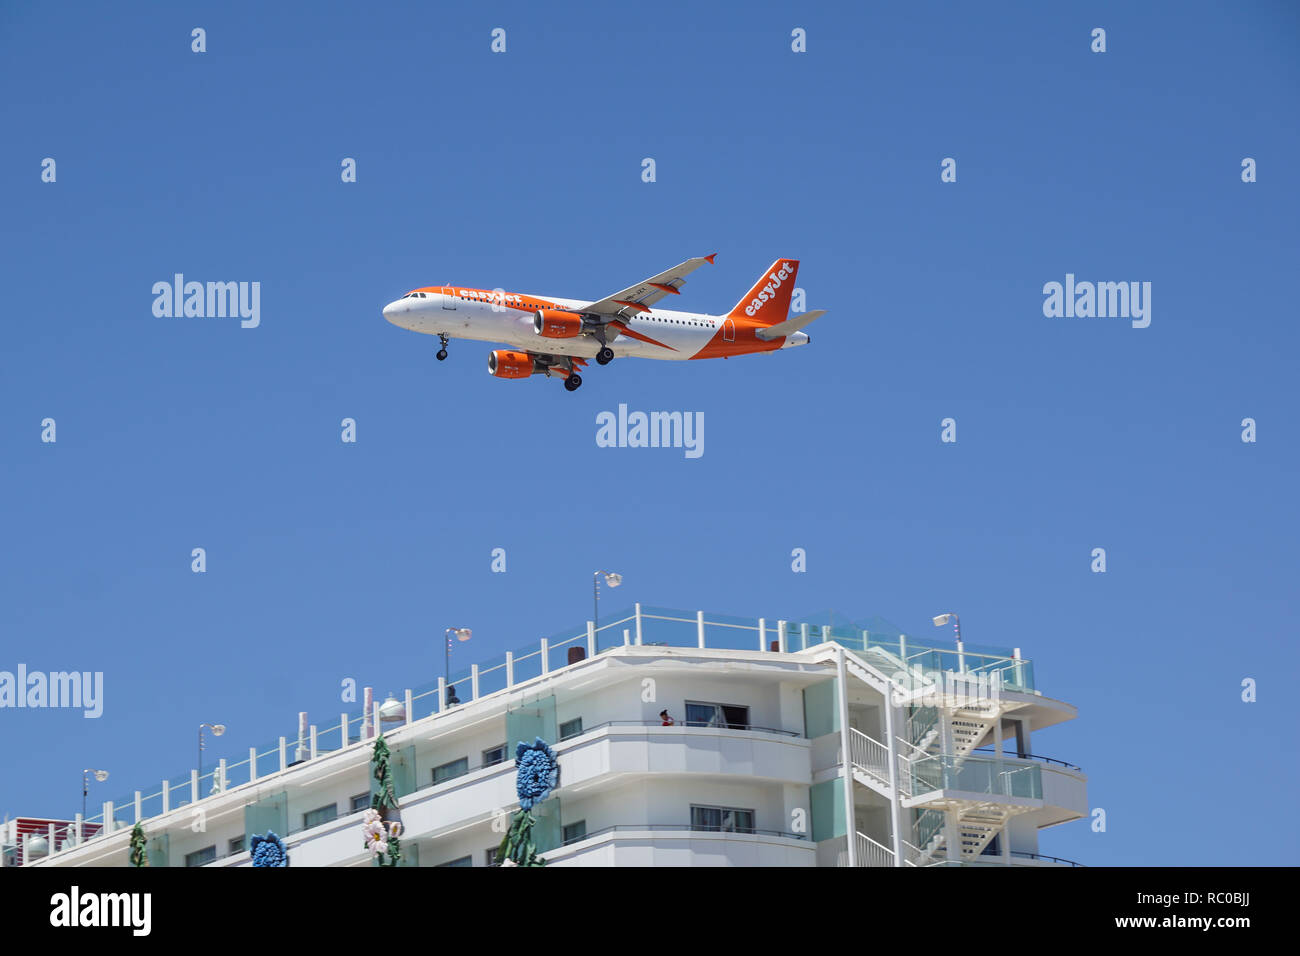 Ibiza Spain June 16-06-2018 - Airplane easyJet Airbus A319-100 is flying to the runway. The Commercial jet aeroplane started the landing gear system for landing. Stock Photo